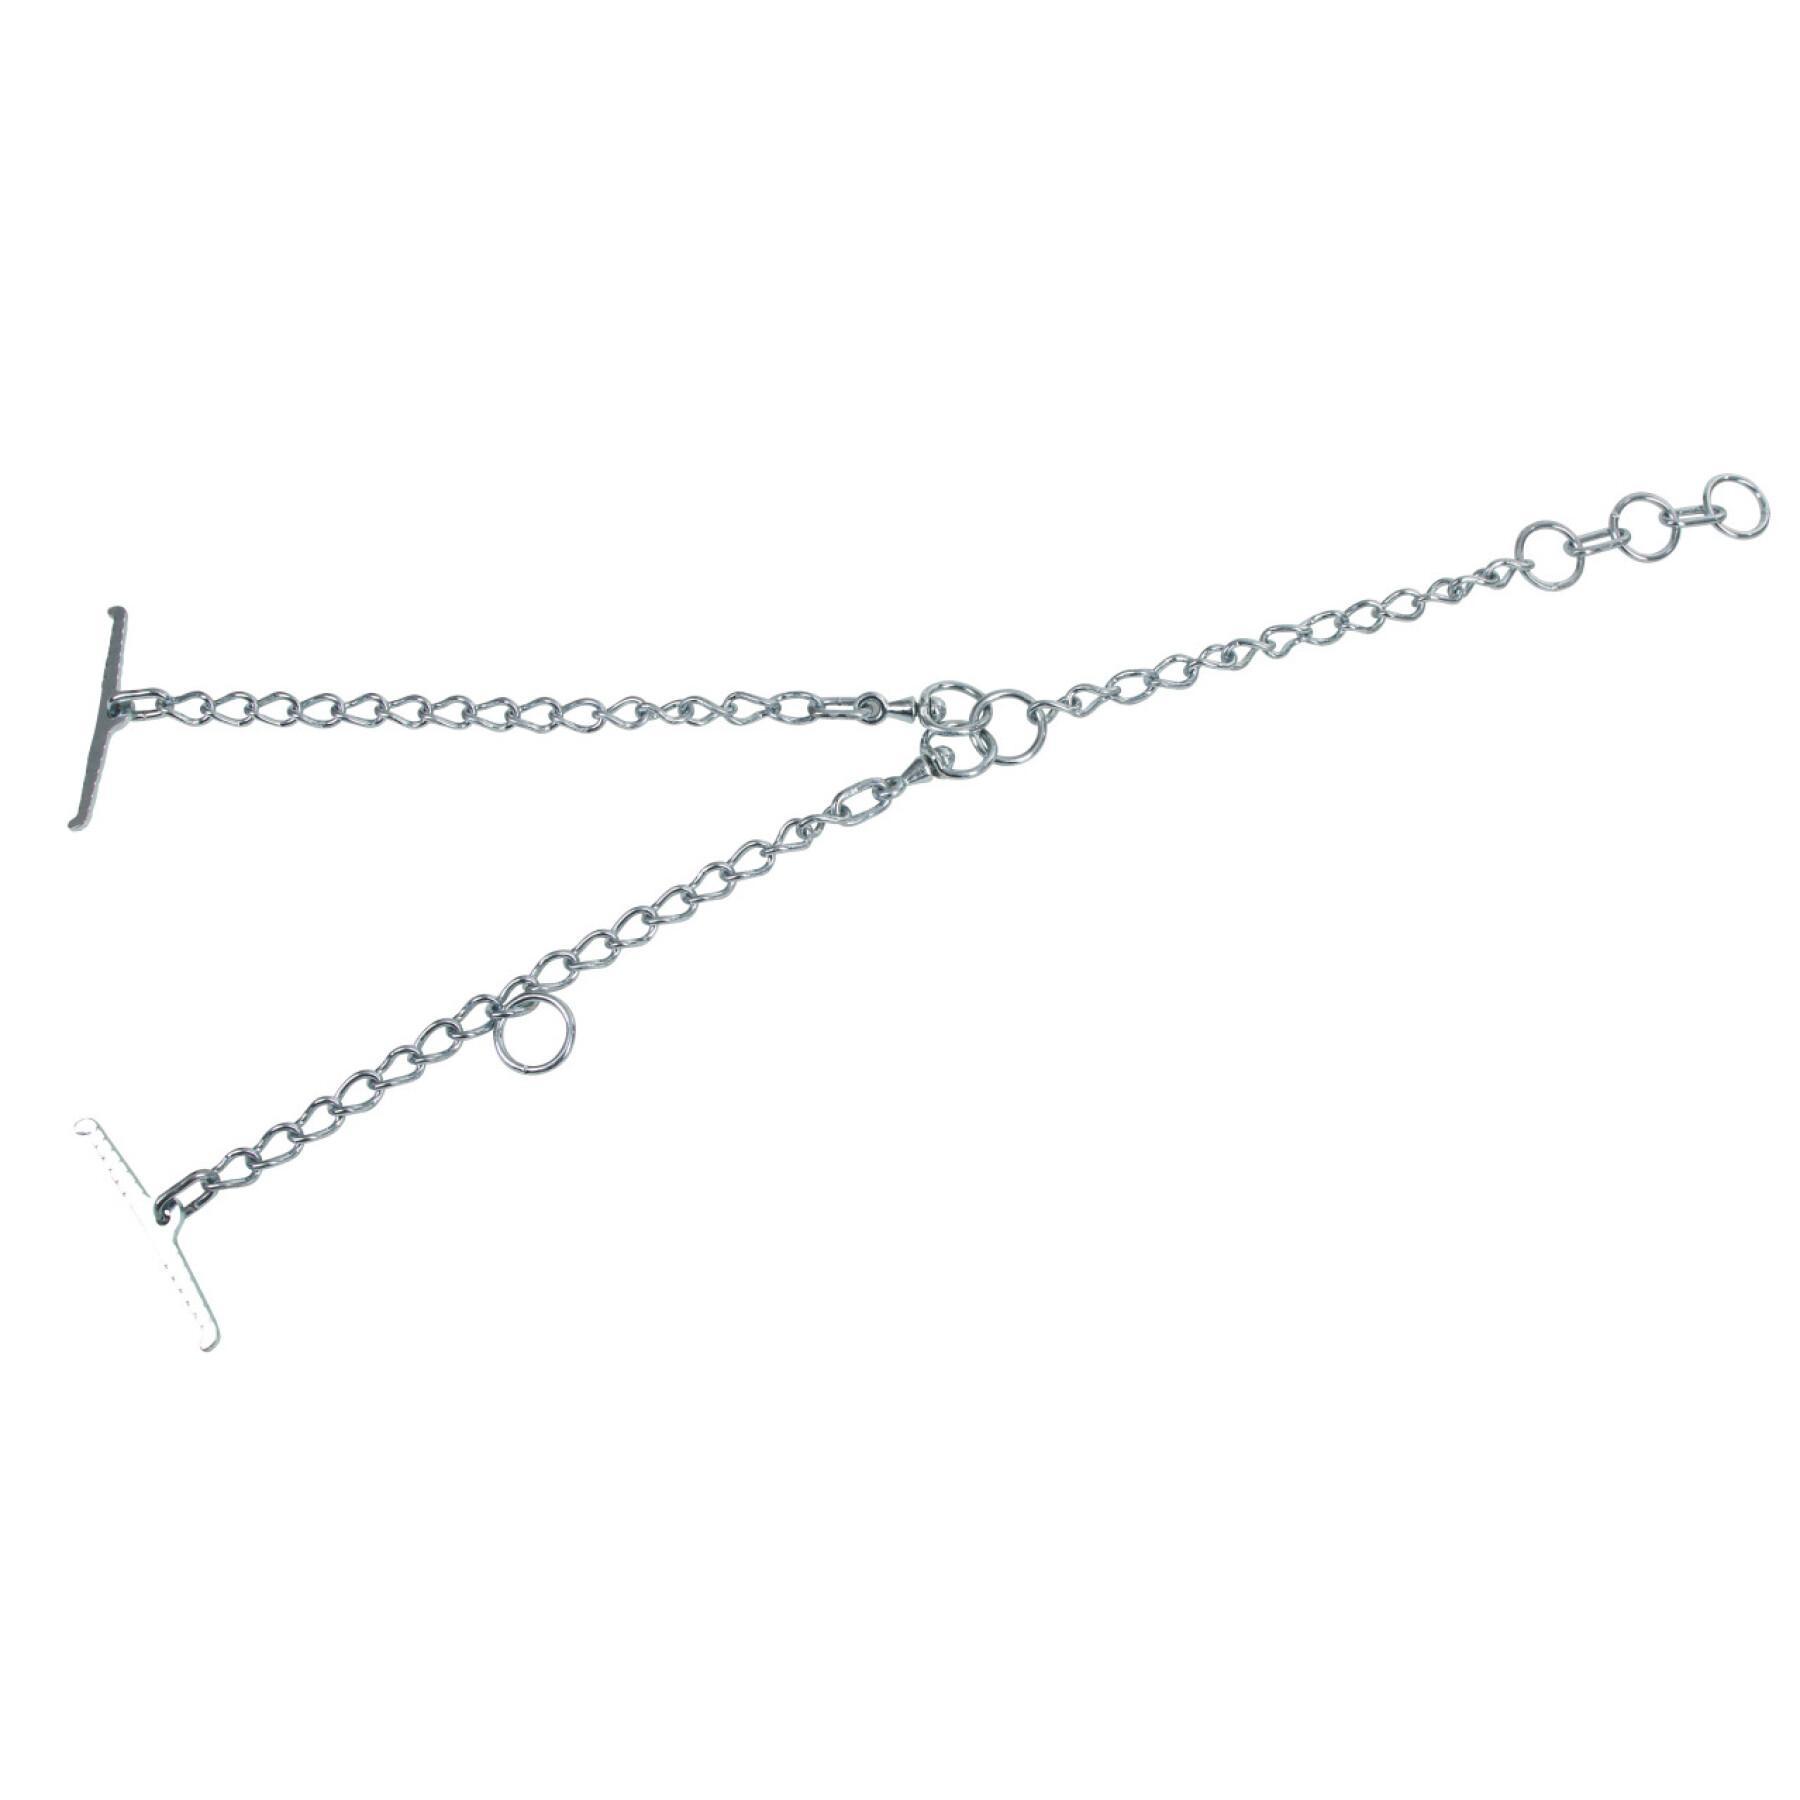 Zinc plated double zip line chain with carabiner Kerbl